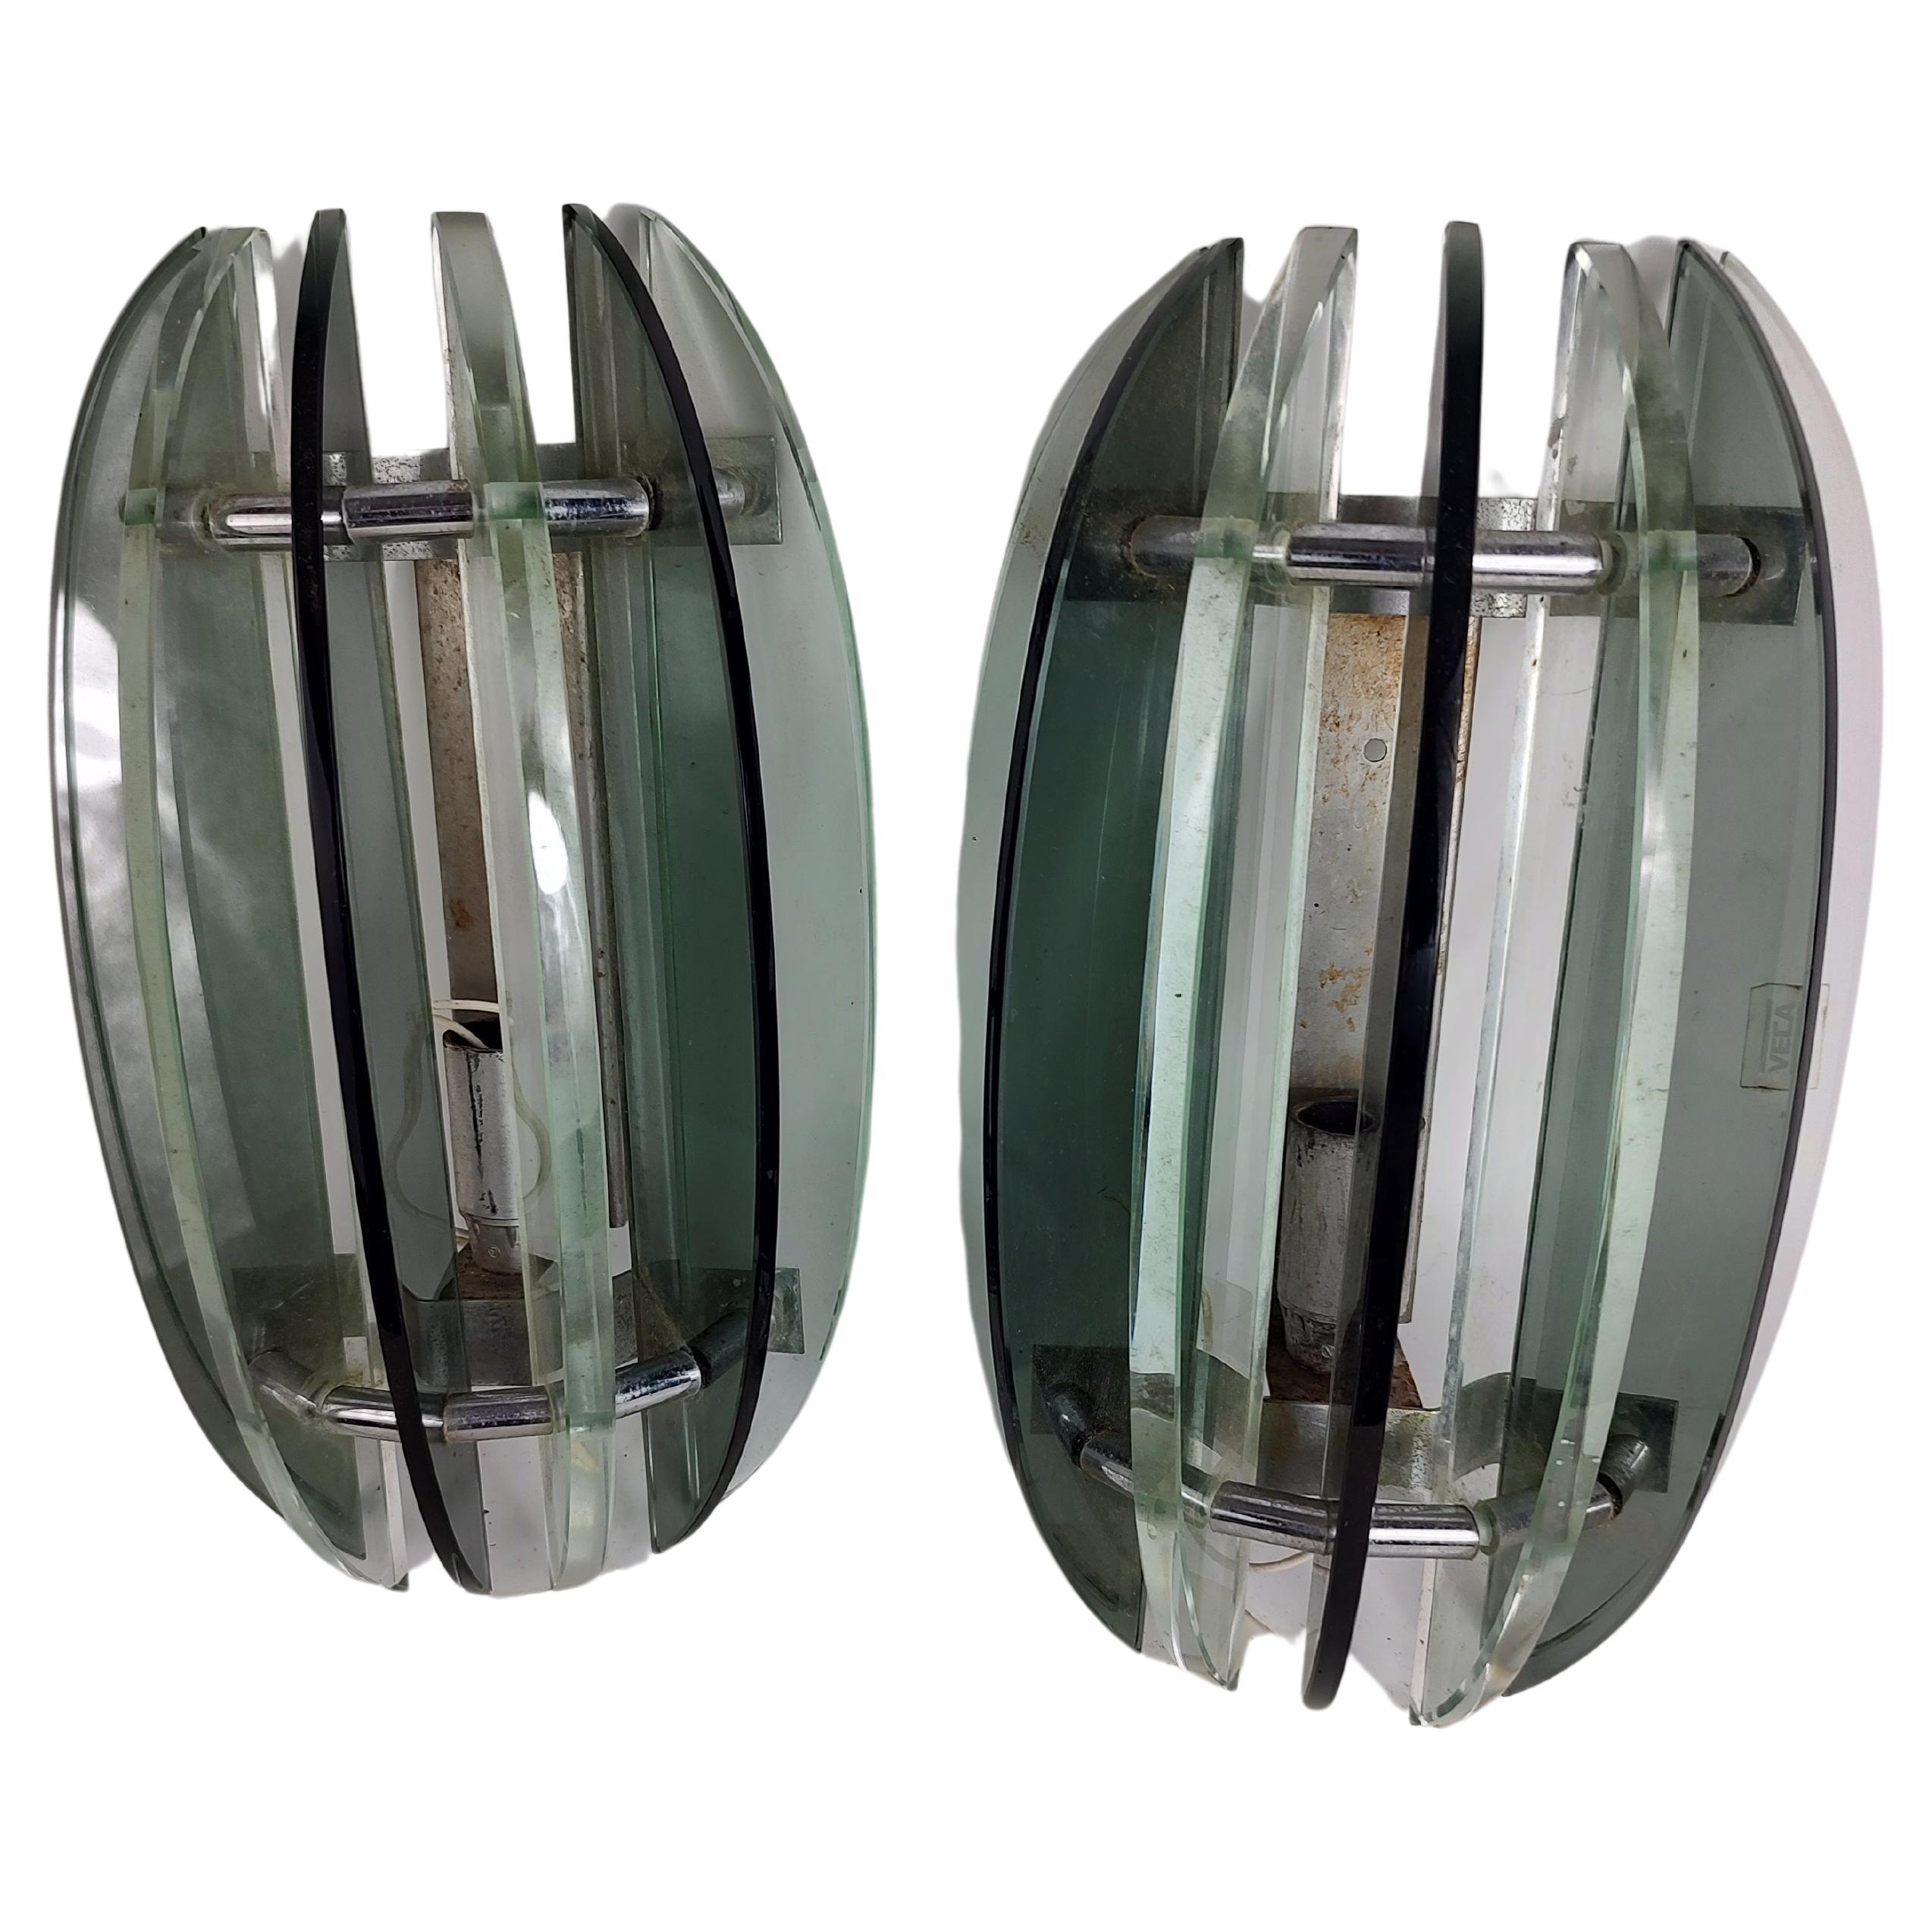 Mid-Century Modern Pair of Art Glass Wall Sconces by Veca Italy c1955 For Sale